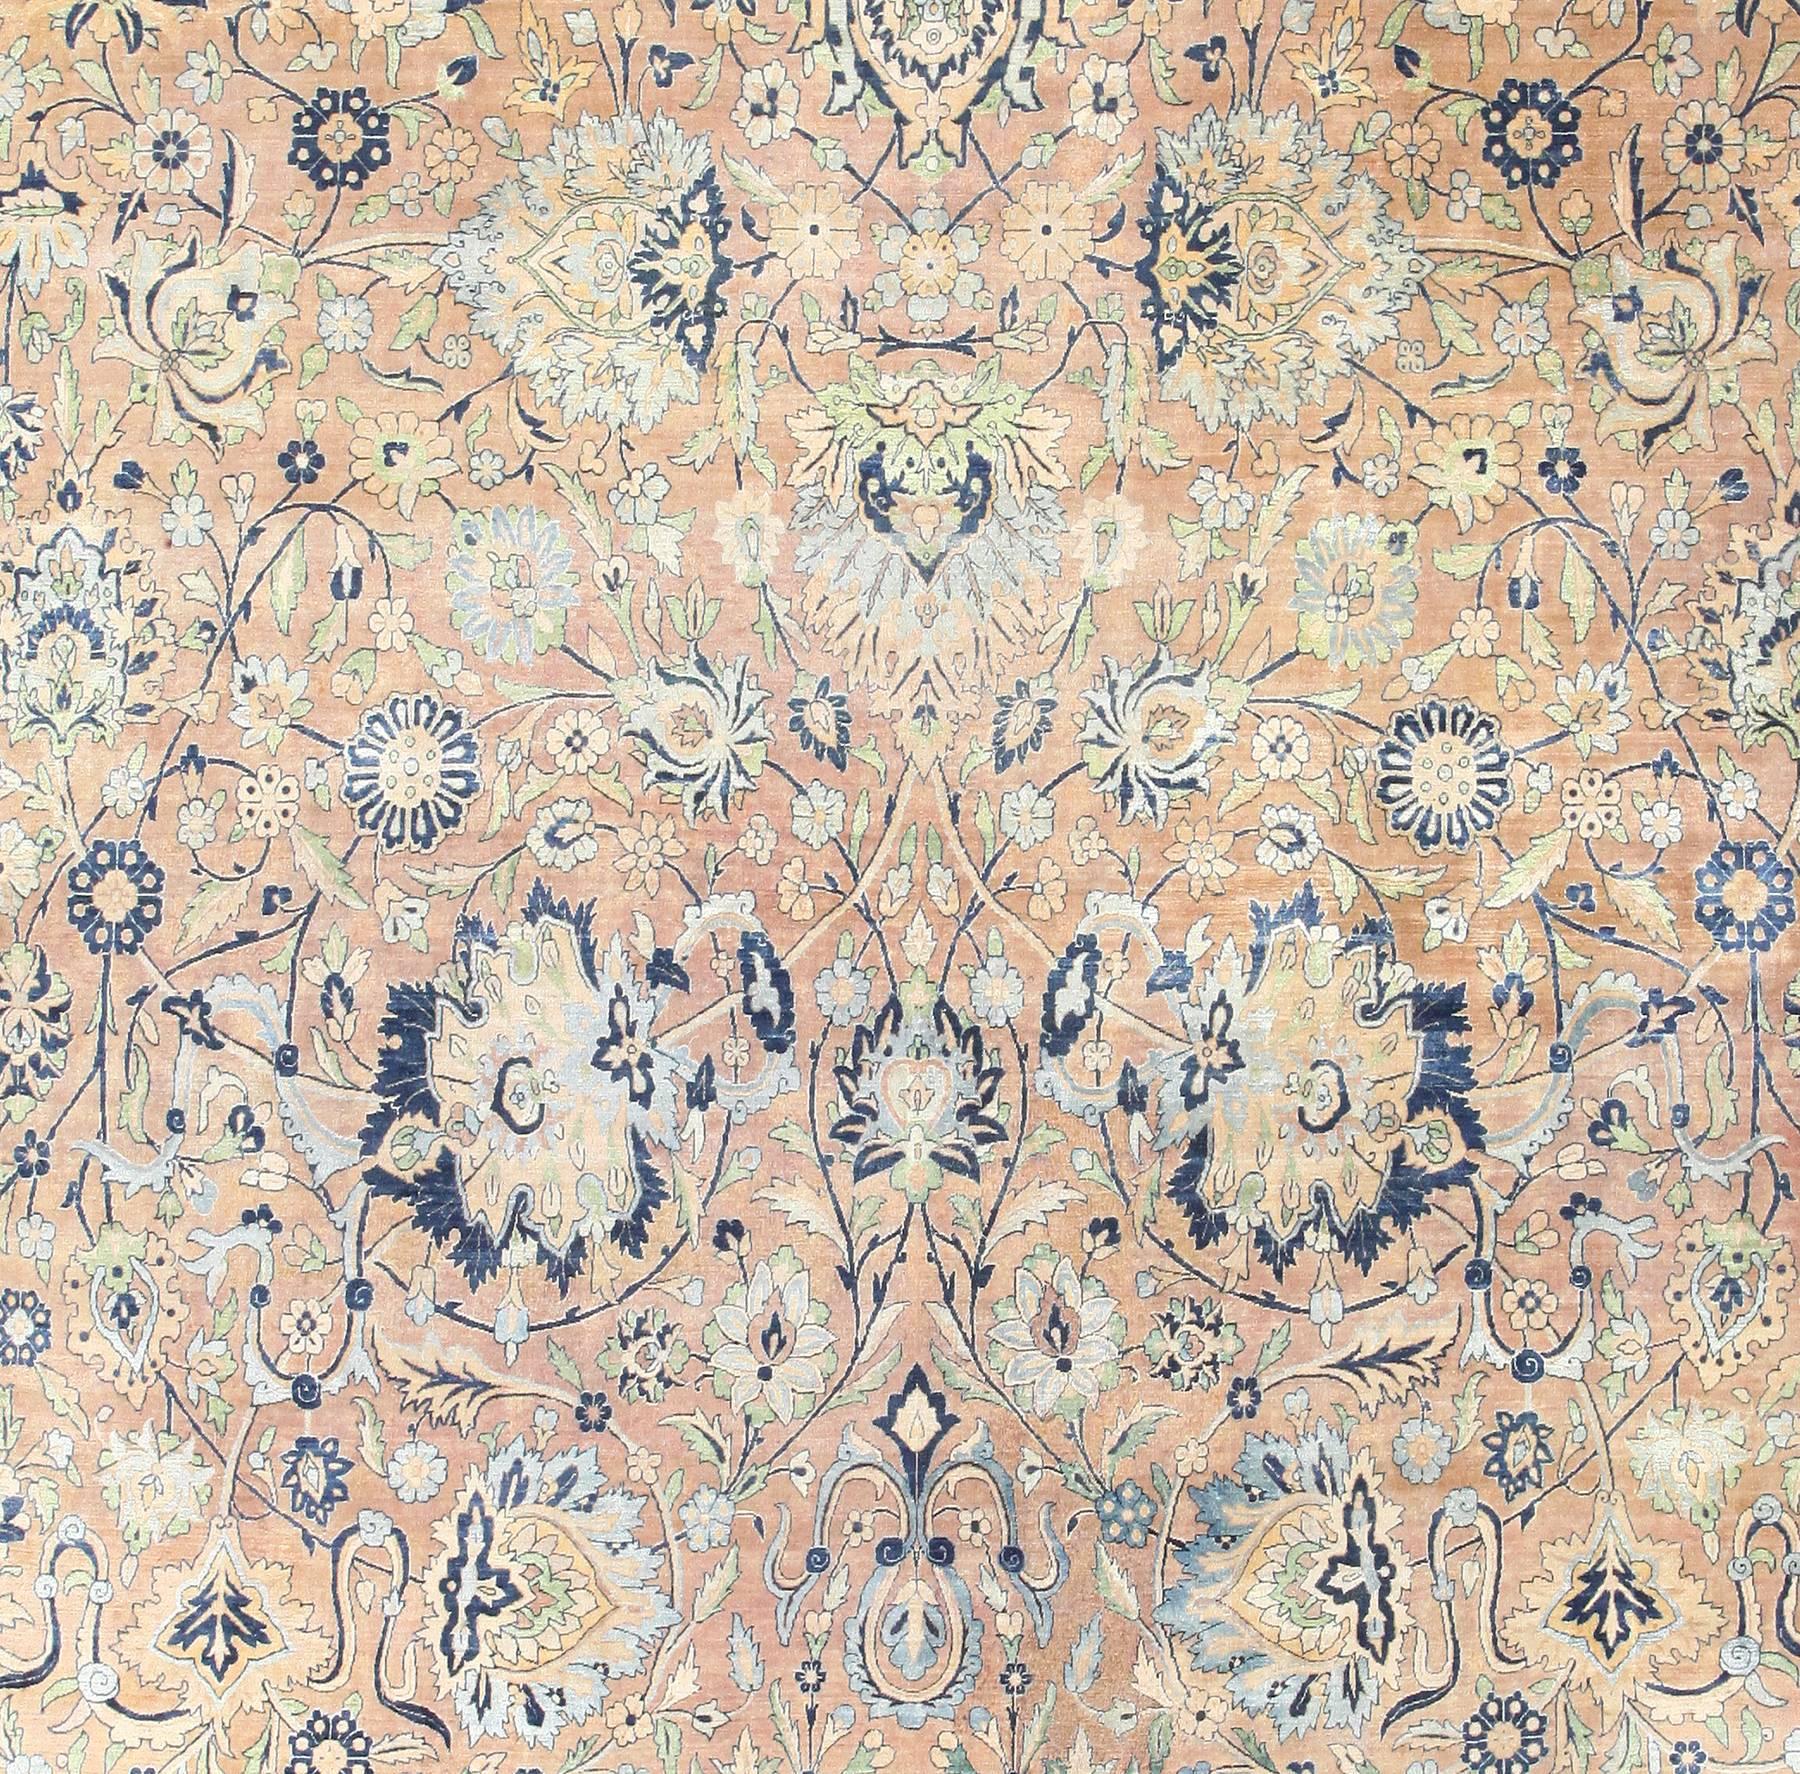 Since the 17th century, Kerman has been a major center for the production of high-quality carpets. The so-called Vase carpets of the Safavid period are among the greatest masterpieces of Persian weaving. When Persian rug production moved into high